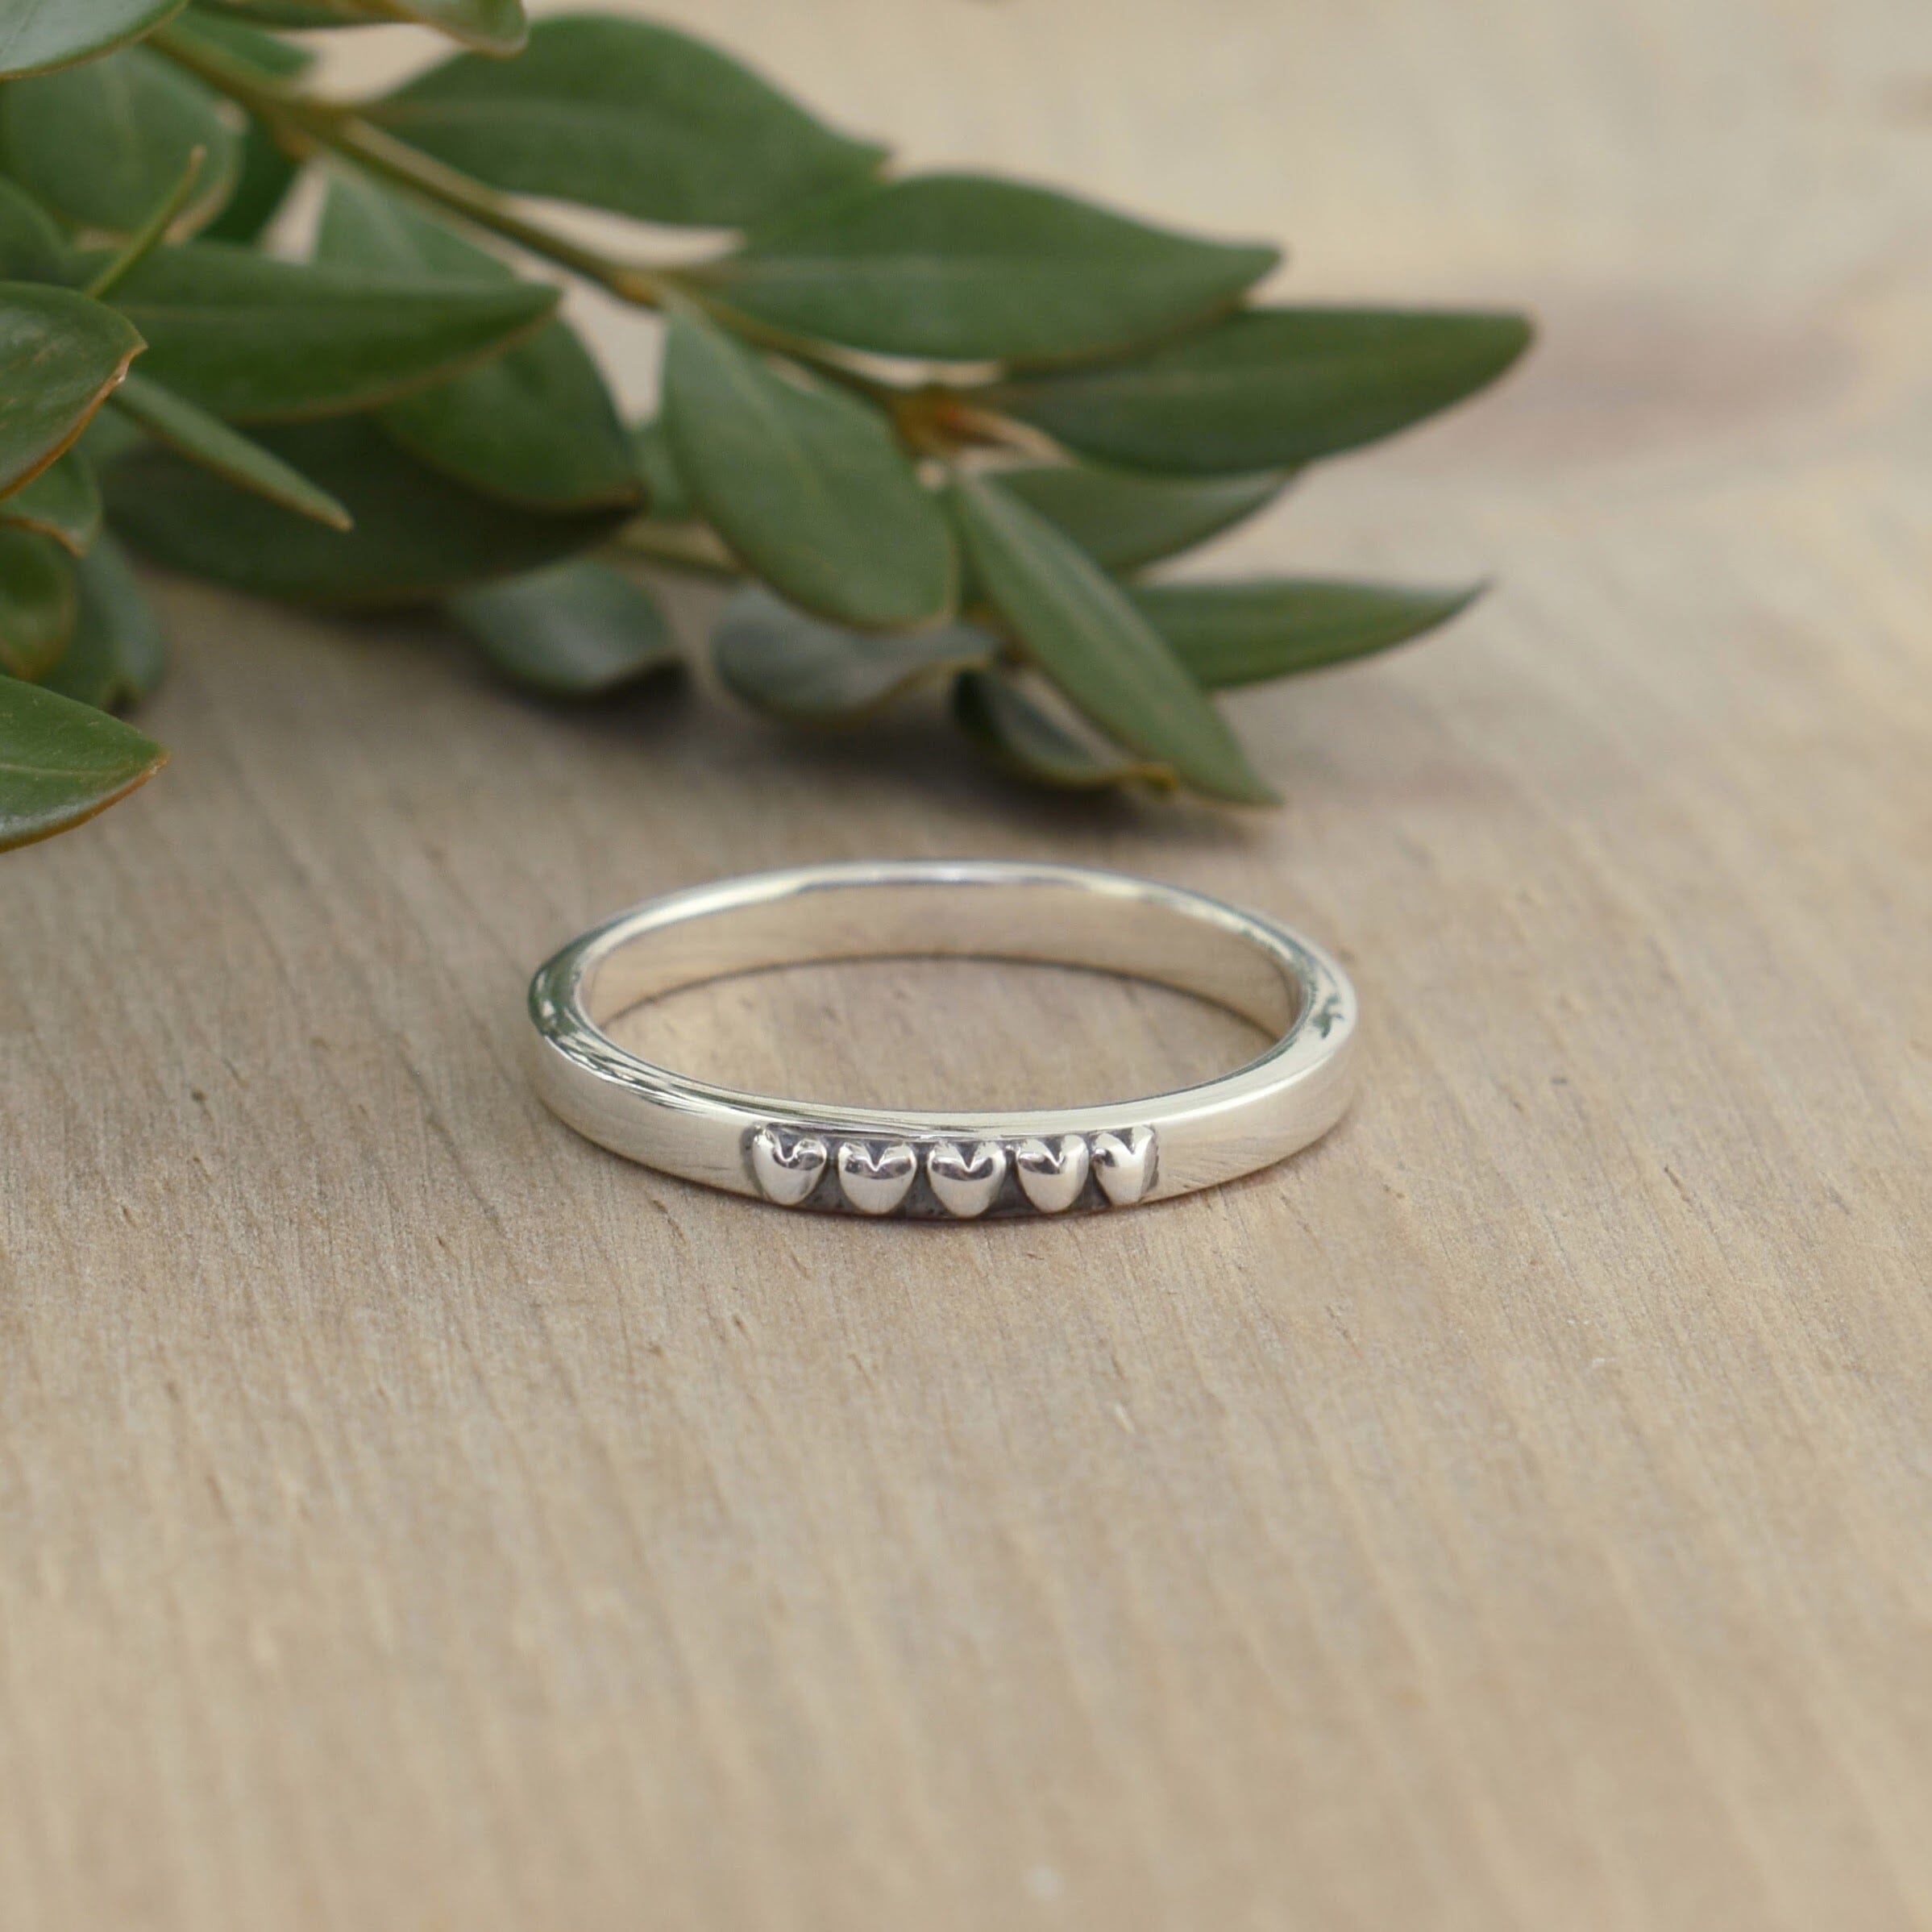 .925 sterling silver stack ring with 5 hearts